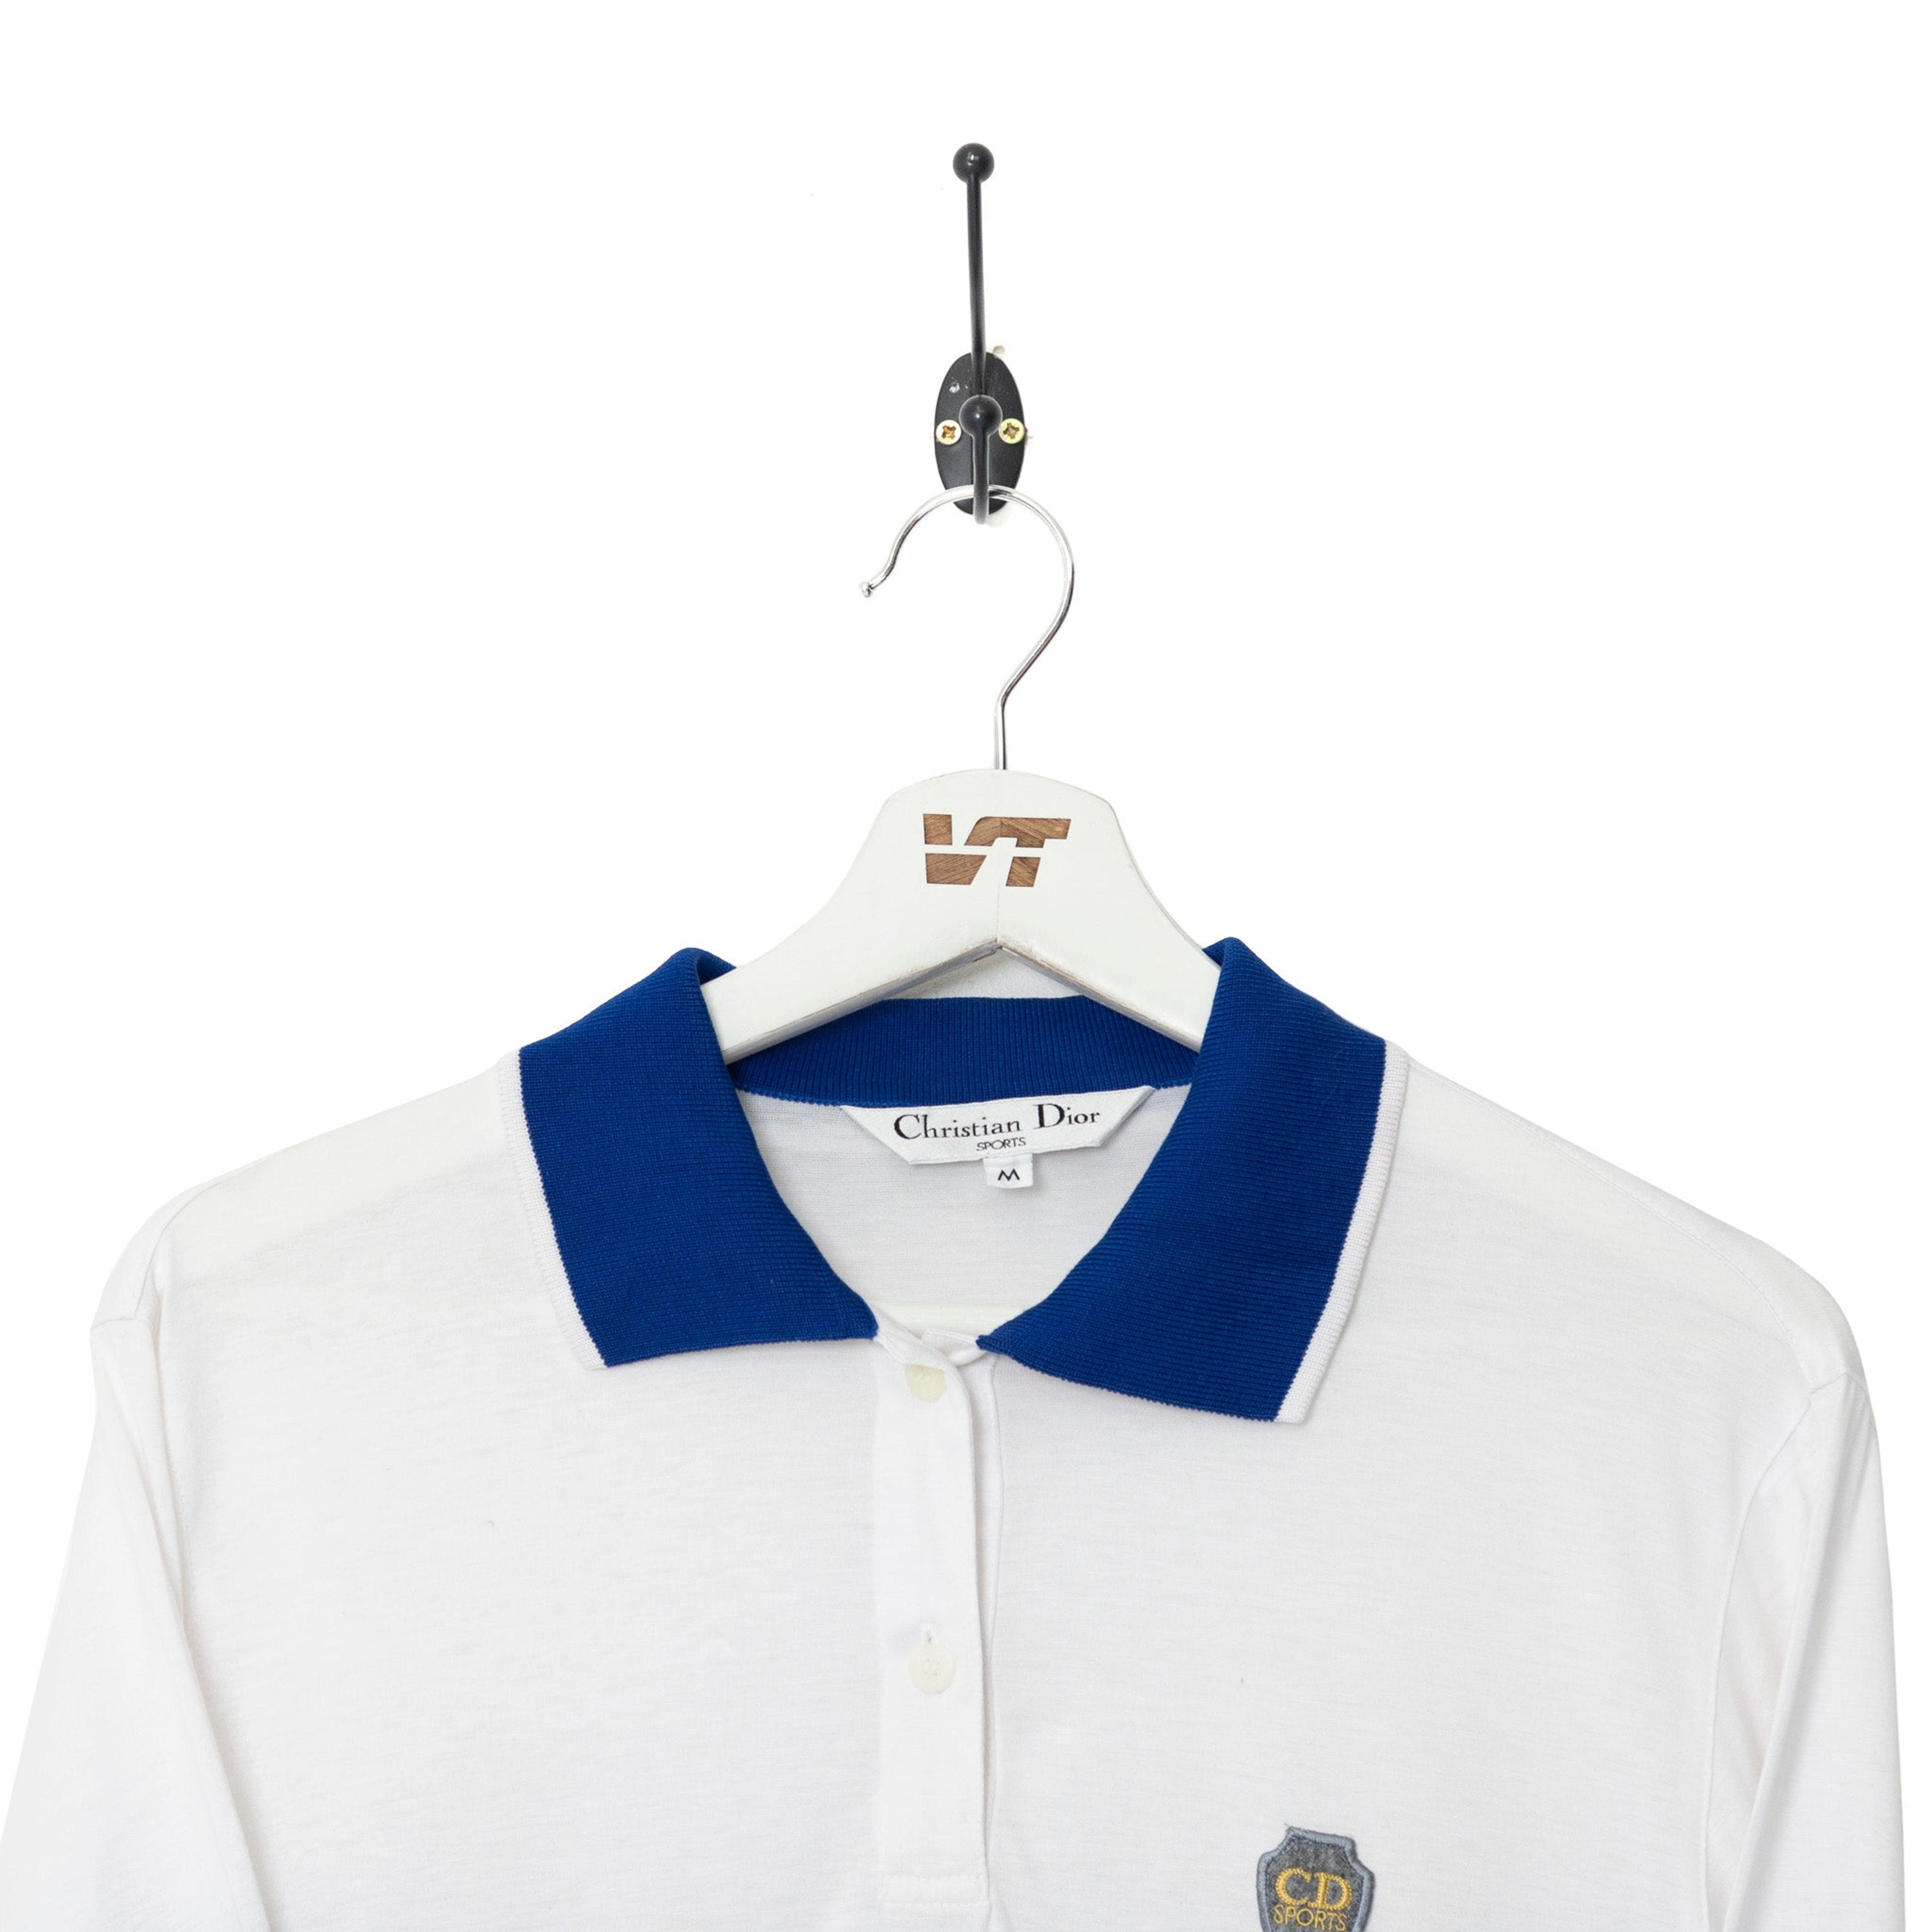 Alternate View 1 of Christian Dior Sports LS Panel Polo Shirt